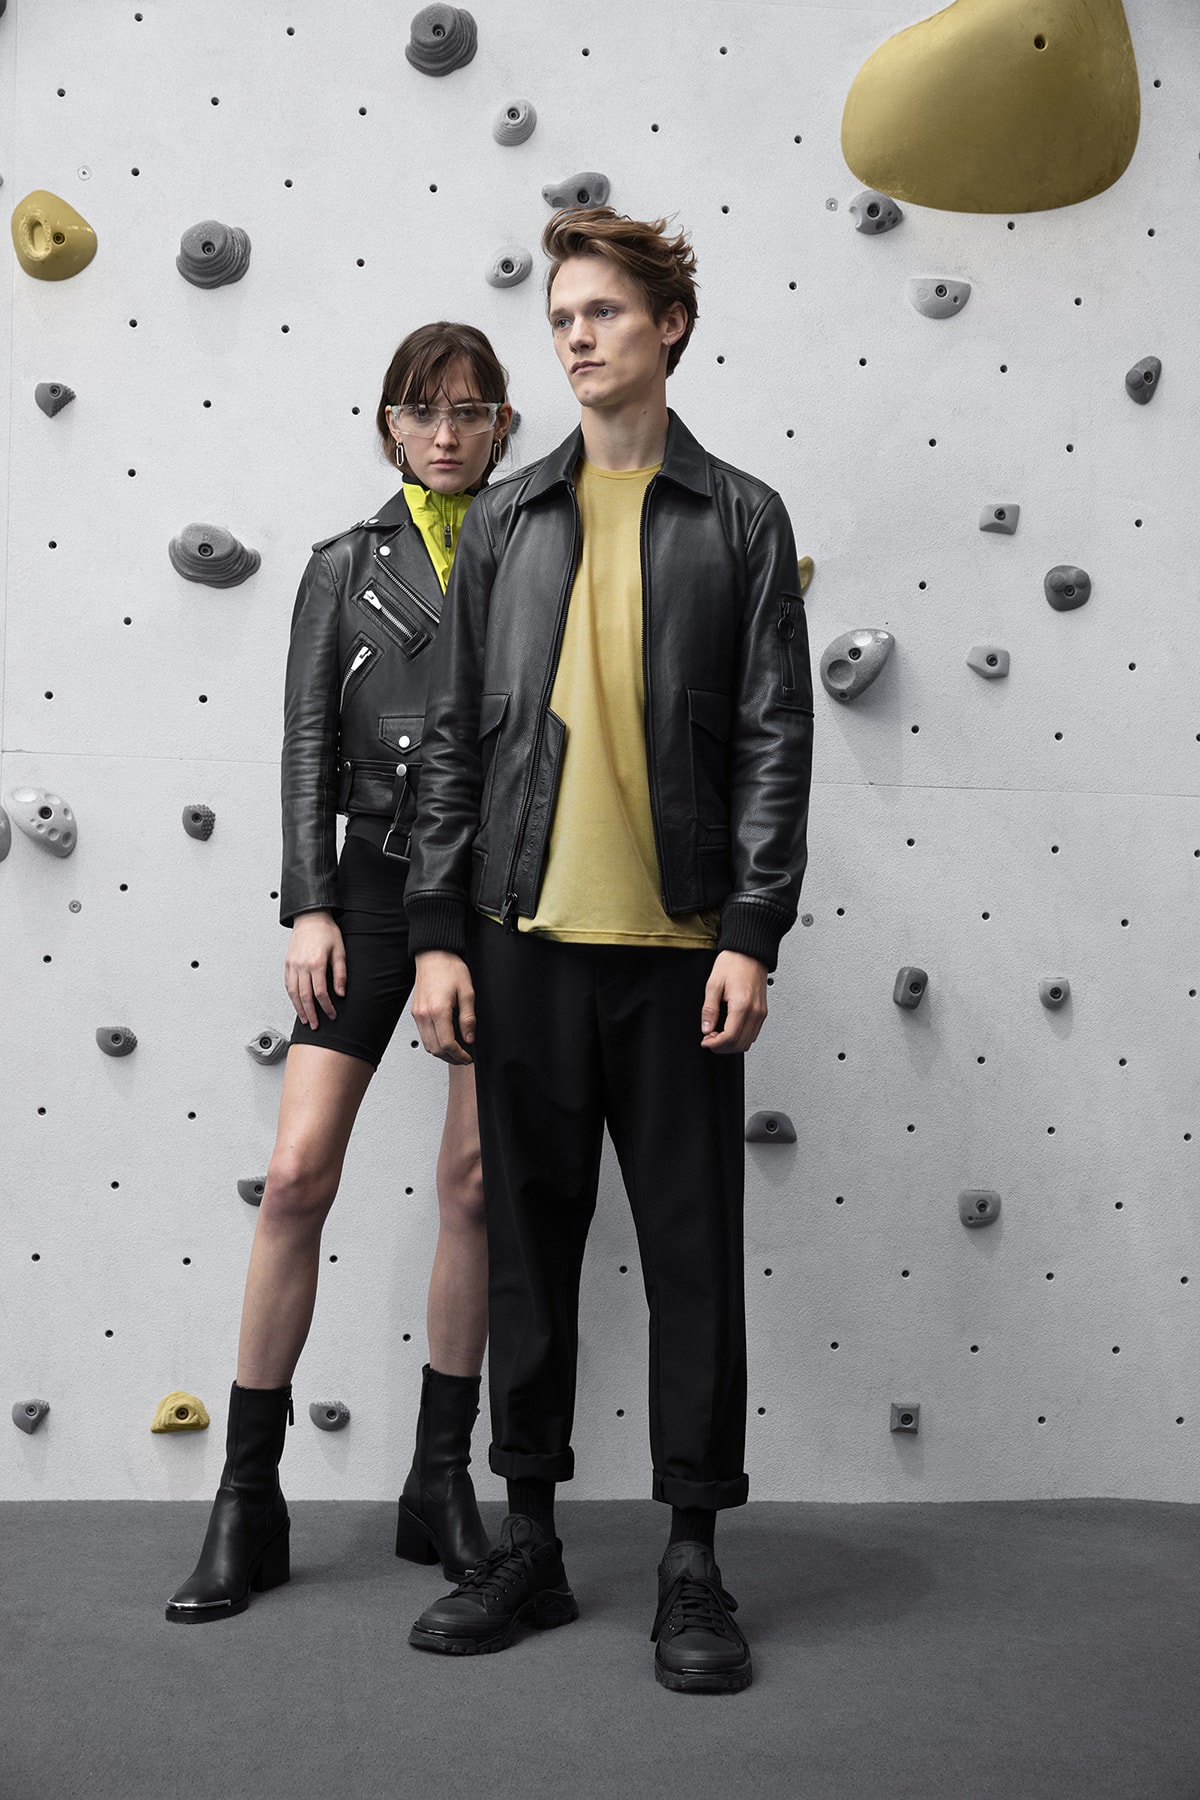 the arrivals mountain wear parkas bombers unisex tees leather jackets yellow shirt rock climbing shorts